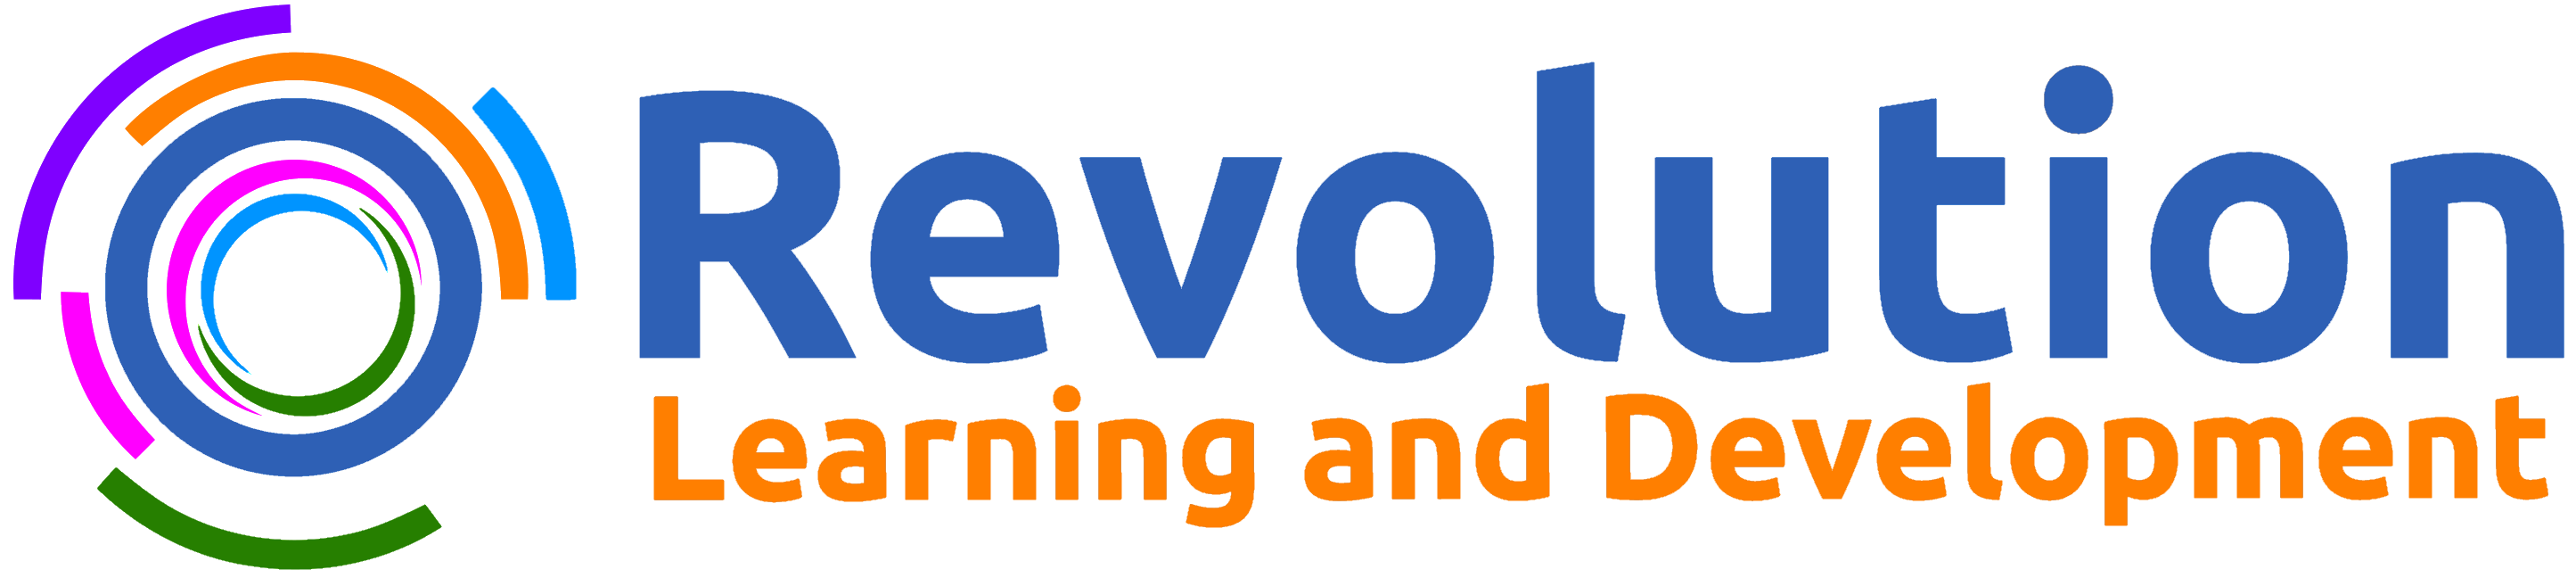 Revolution Learning and Development – Hungary